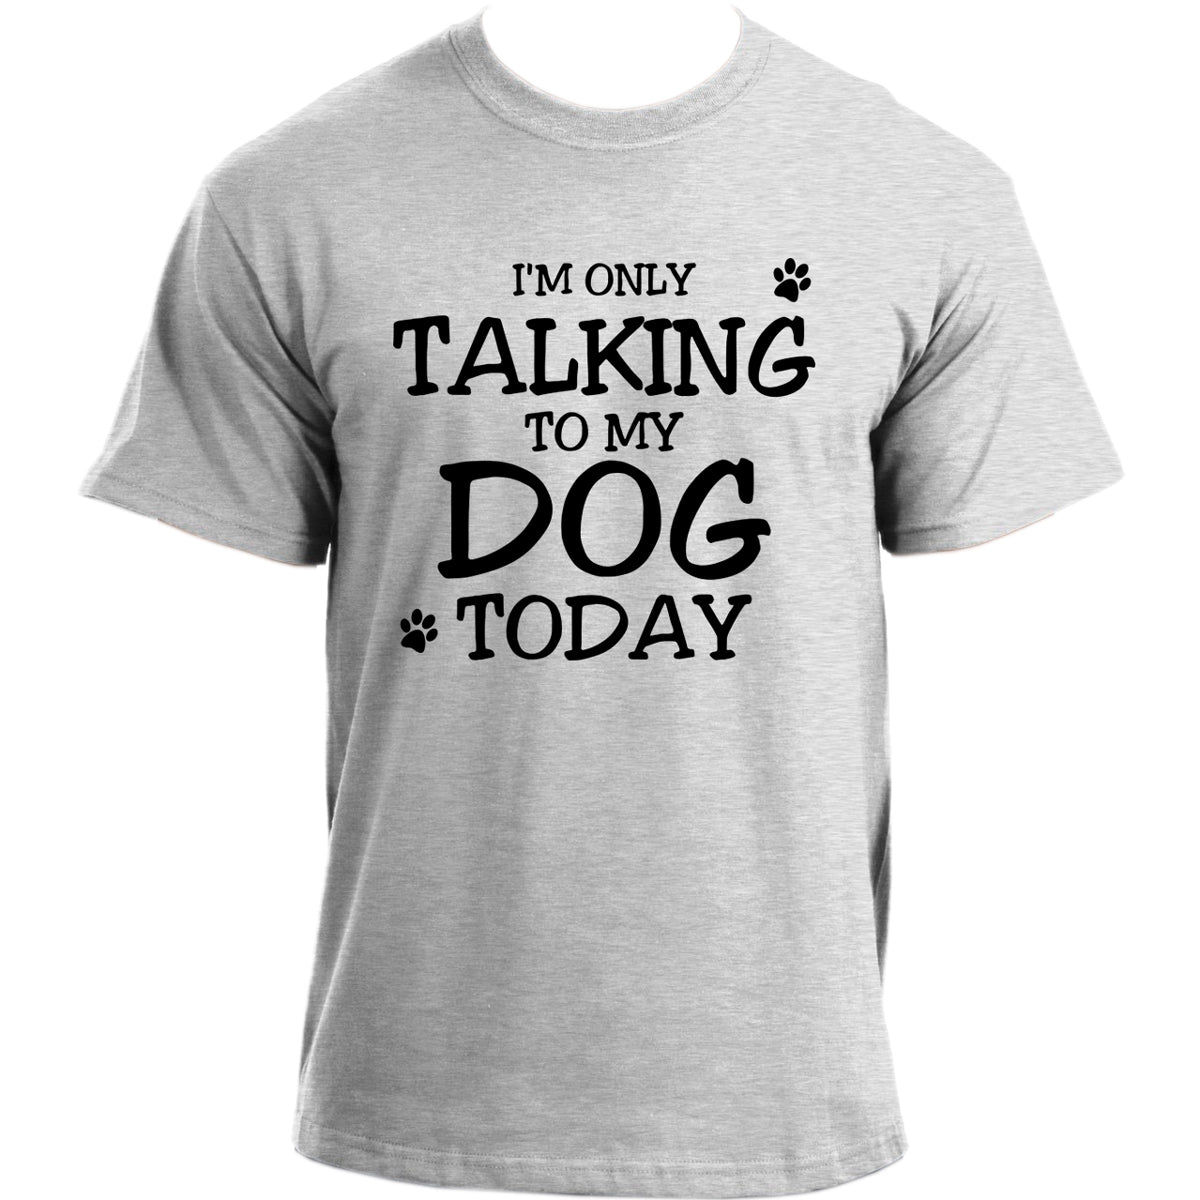 I'm Only Talking to My Dog Today T-Shirt I Dog Owner TShirt I Dog Dad Funny T-shirts For Men